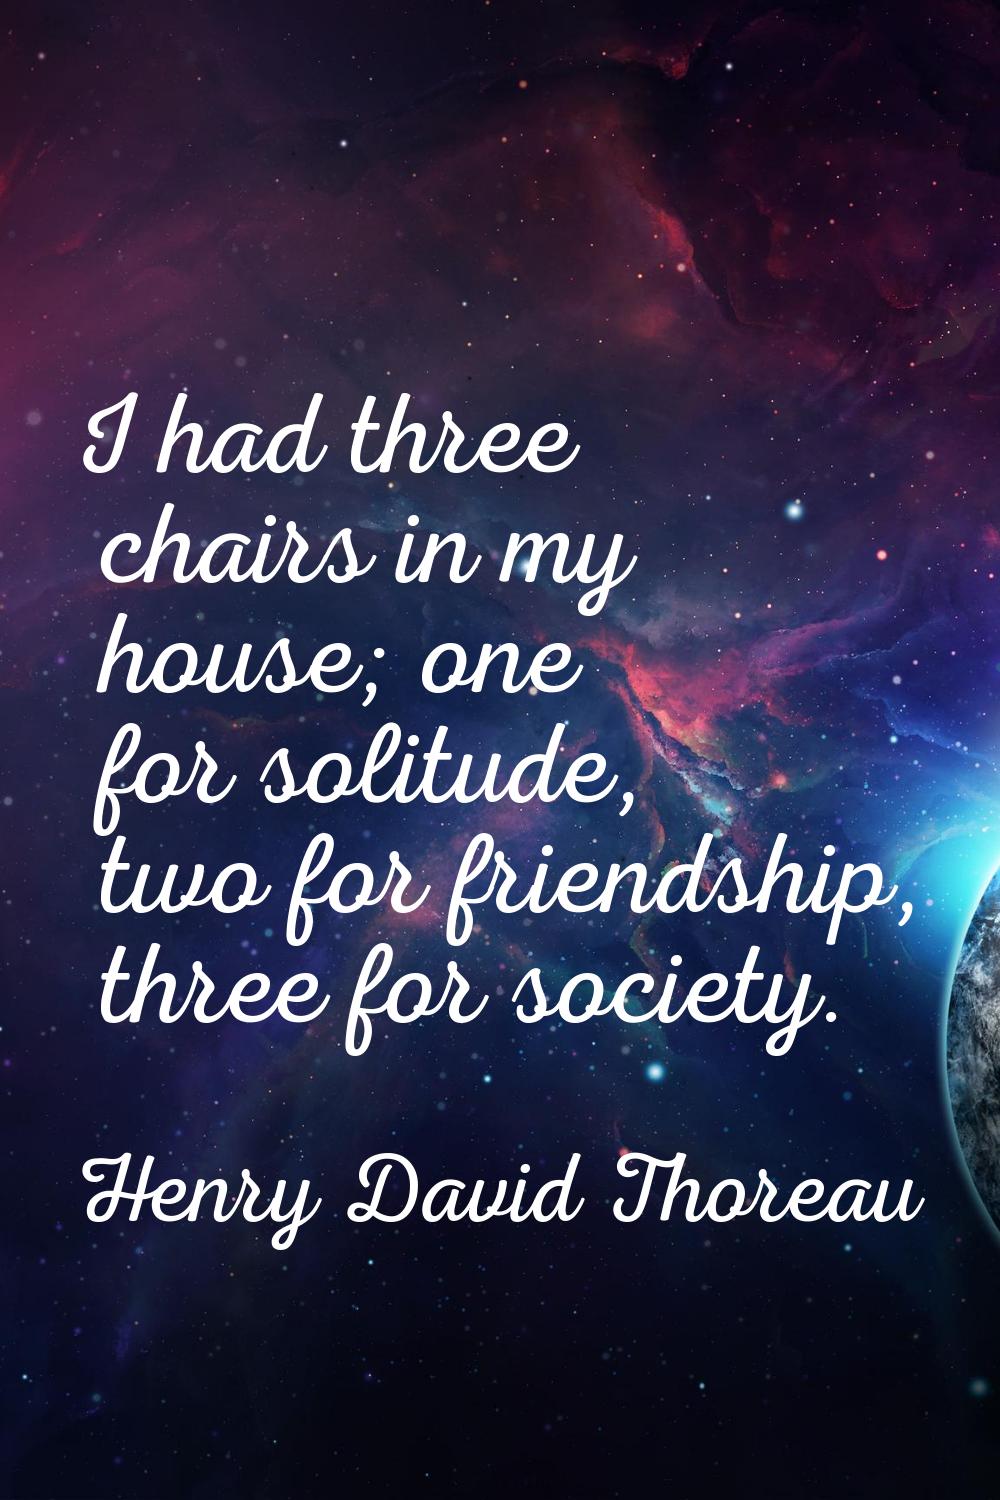 I had three chairs in my house; one for solitude, two for friendship, three for society.